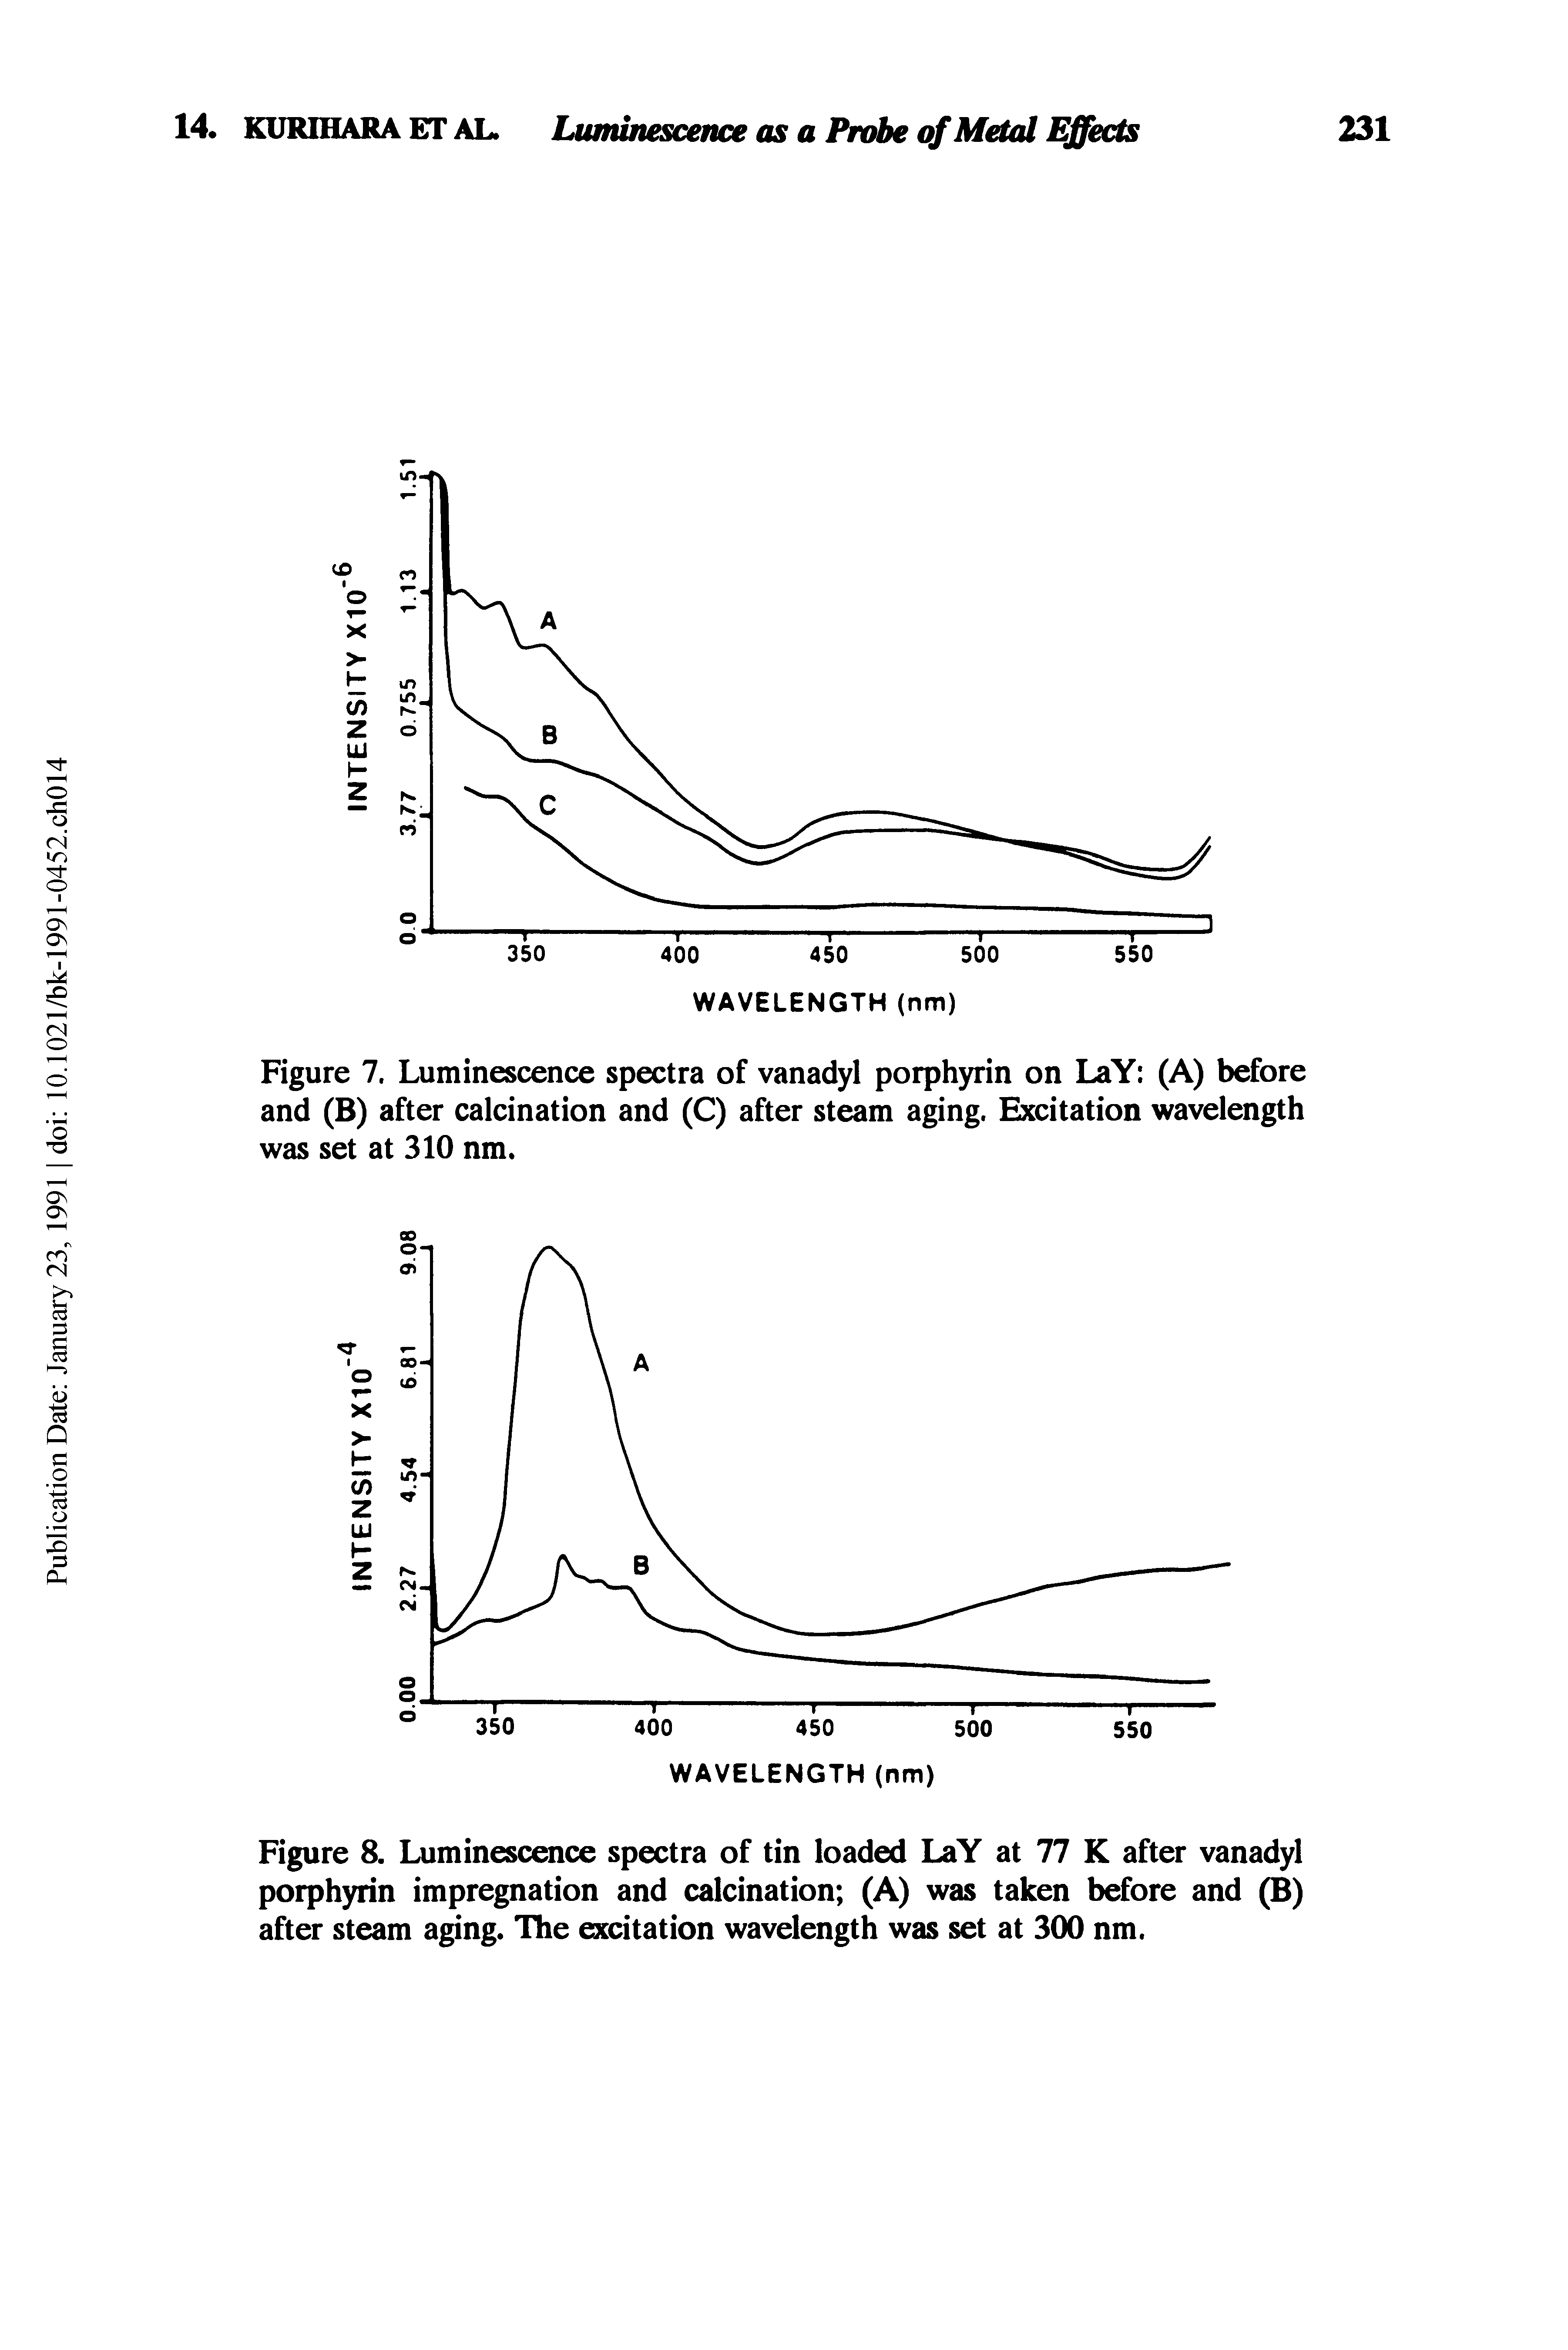 Figure 8. Luminescence spectra of tin loaded LaY at 77 K after vanadyl porphyrin impregnation and calcination (A) was taken before and (B) after steam aging. The excitation wavelength was set at 300 nm.